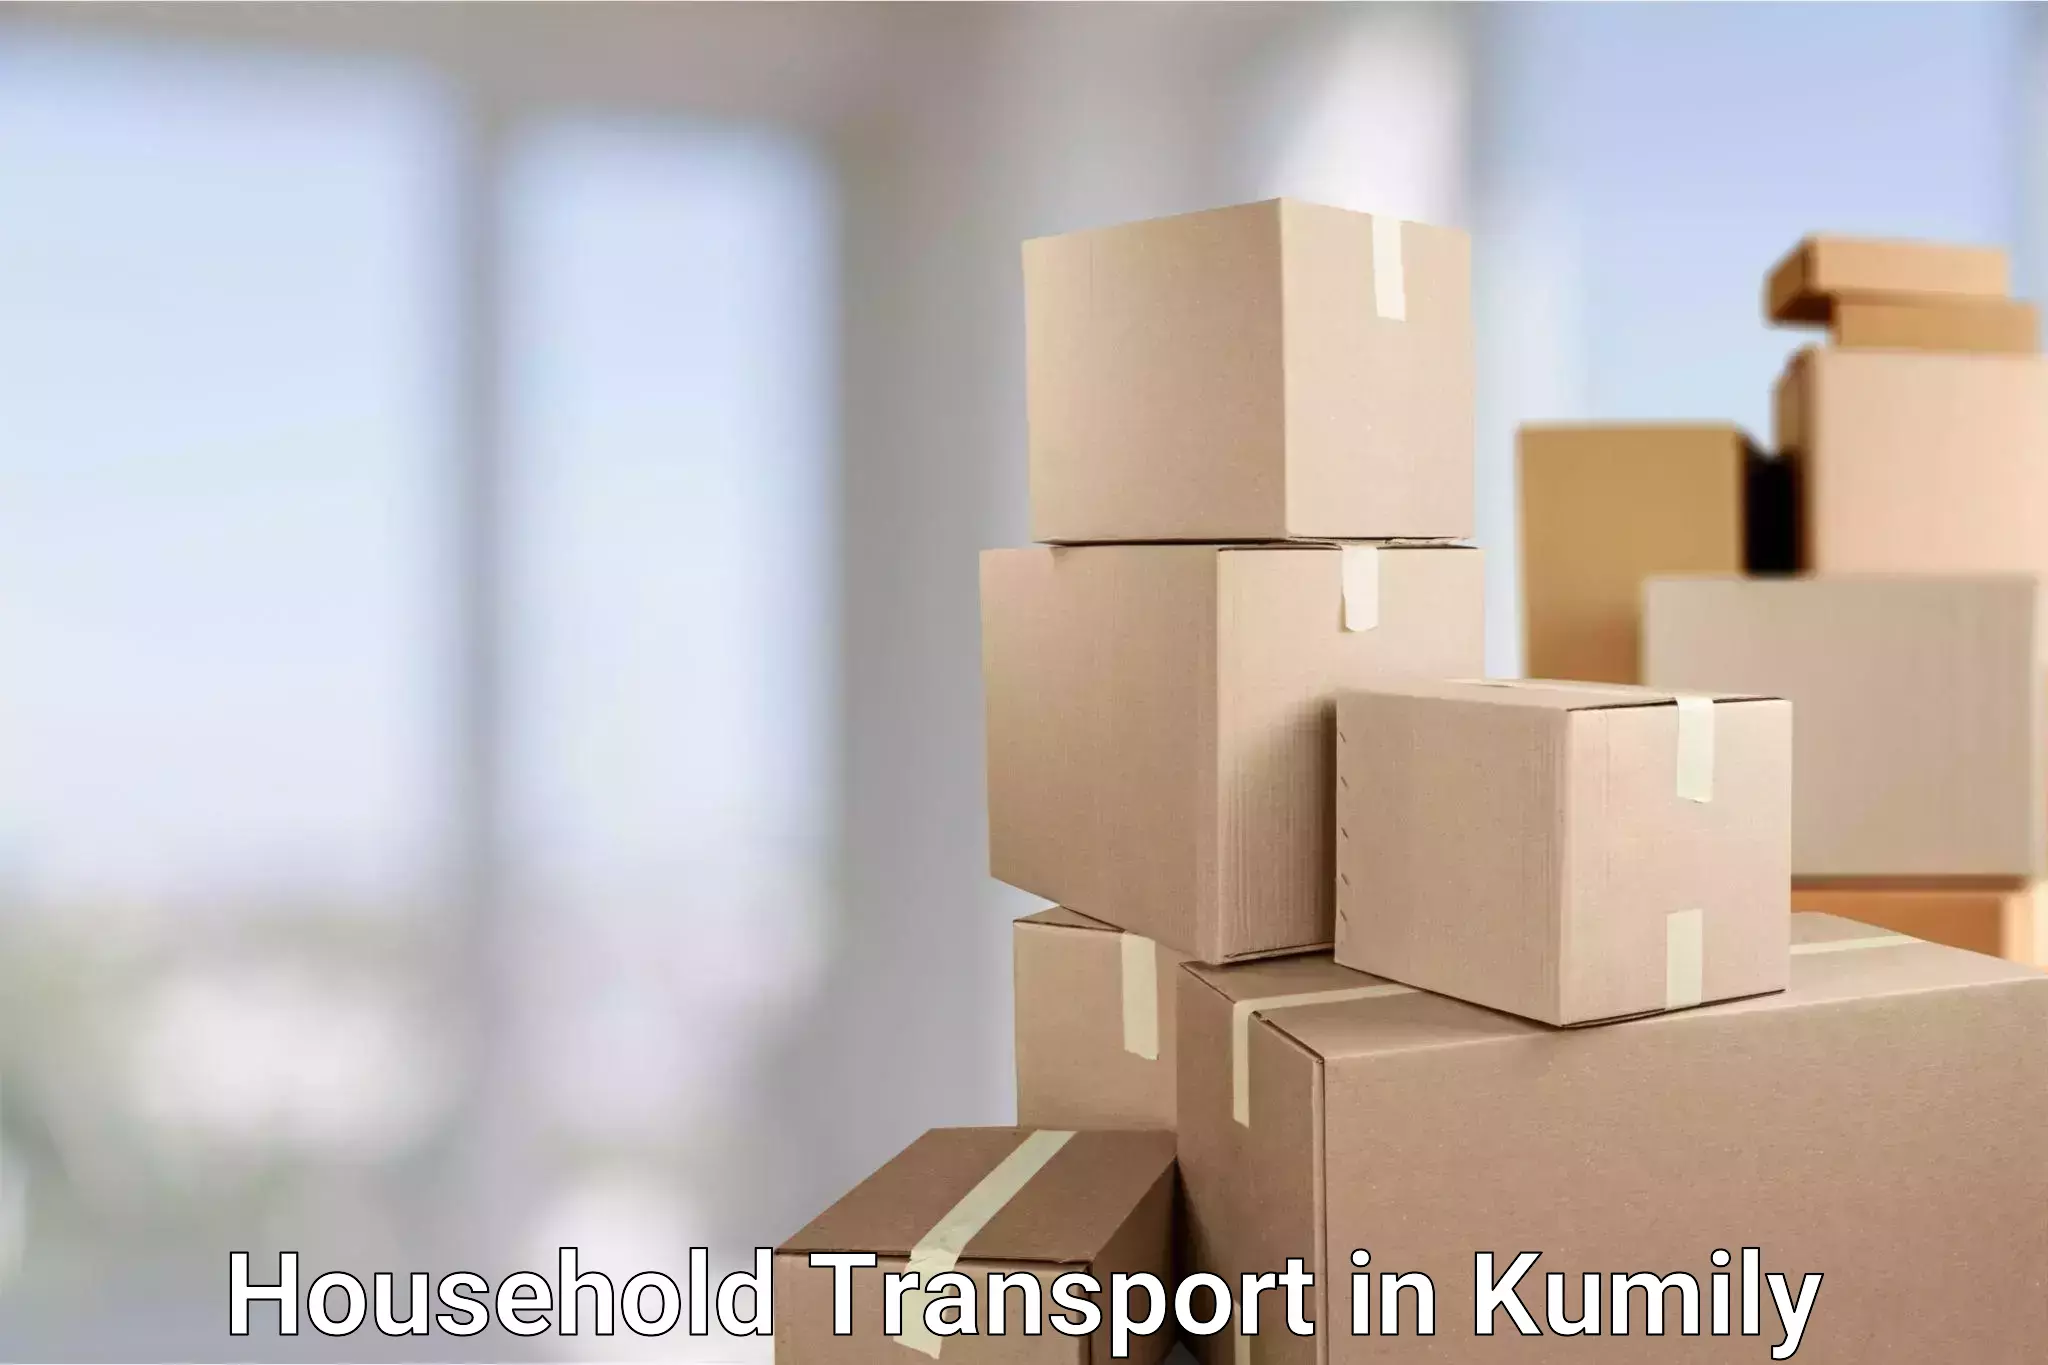 Furniture transport services in Kumily